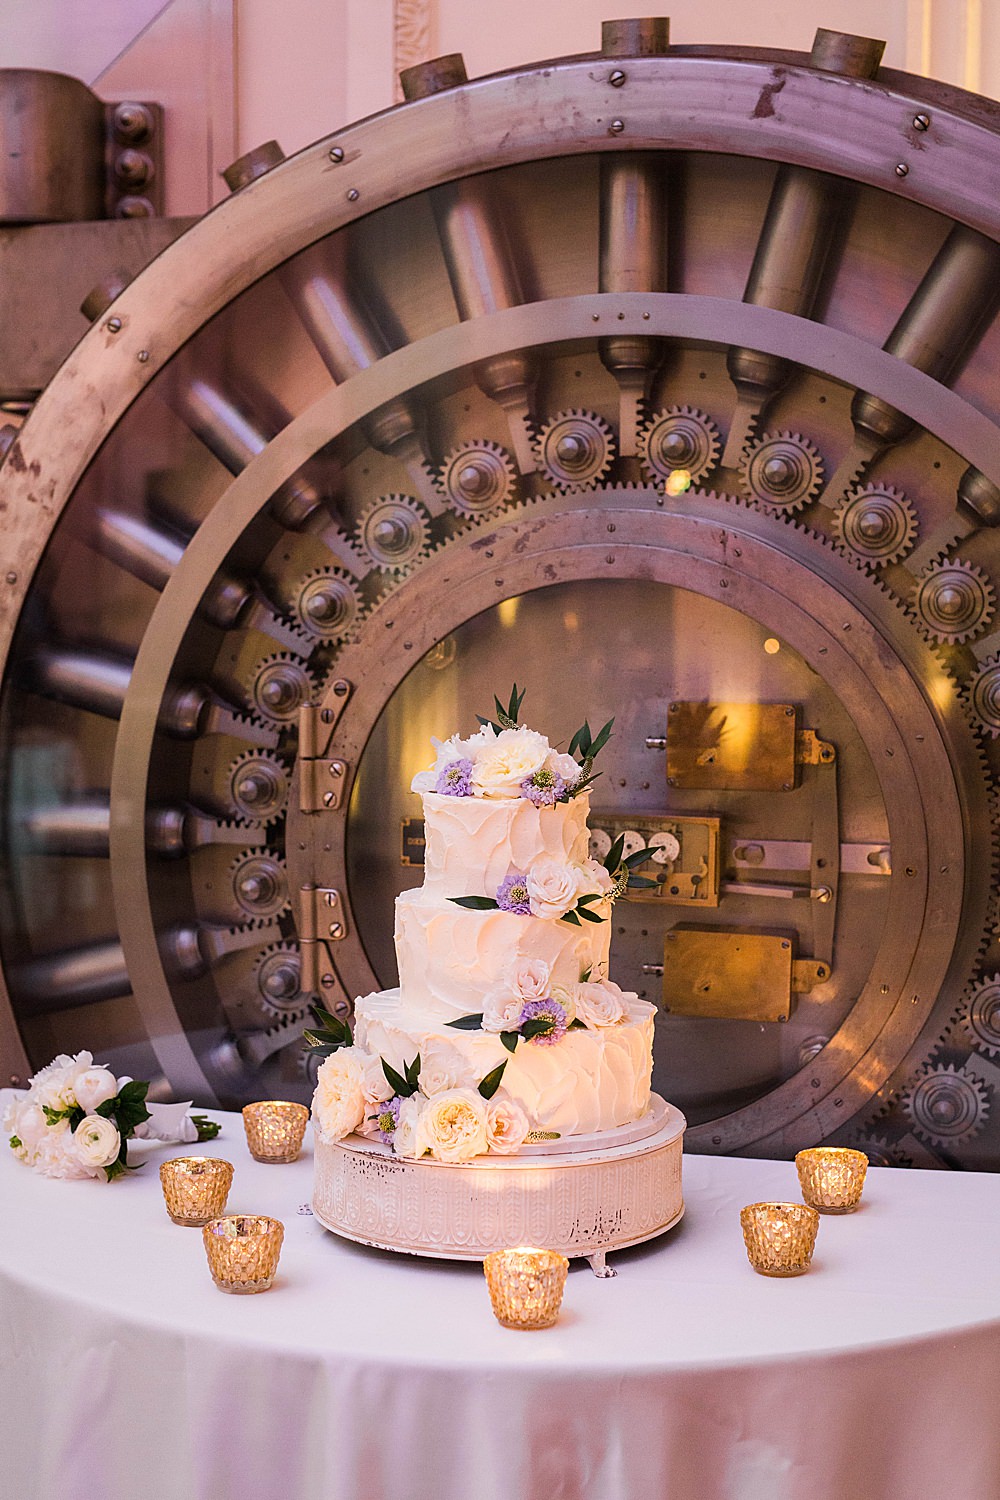 Wedding cake sits on a candle lined table outside bank vault door at the treasury st augustine